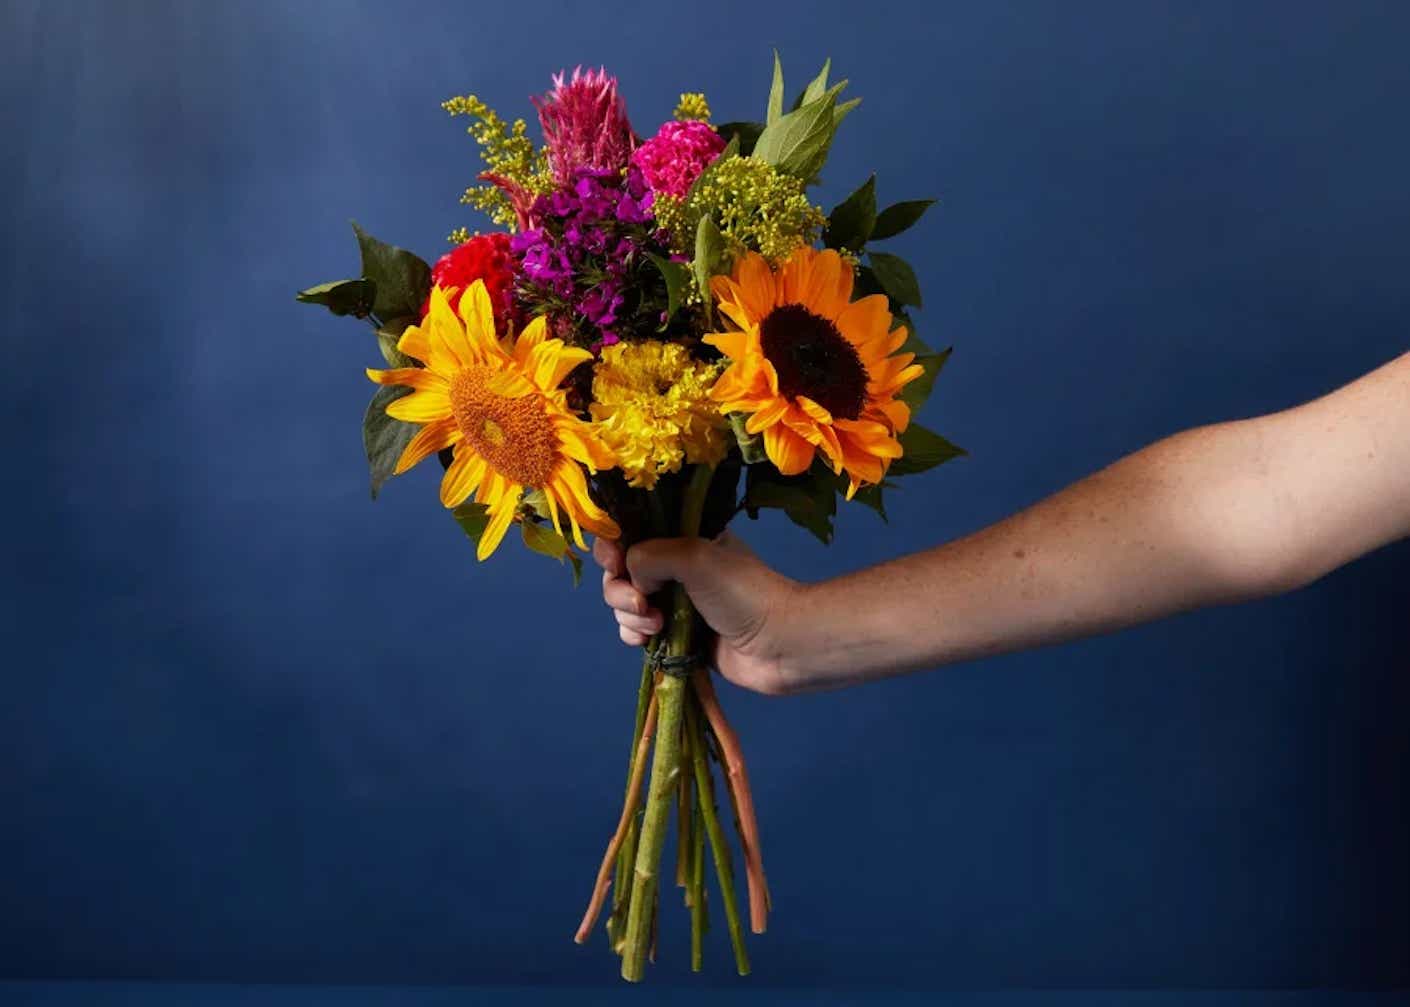 A disembodied arm holds a bouquet of mixed, bright flowers with different colors and textures.